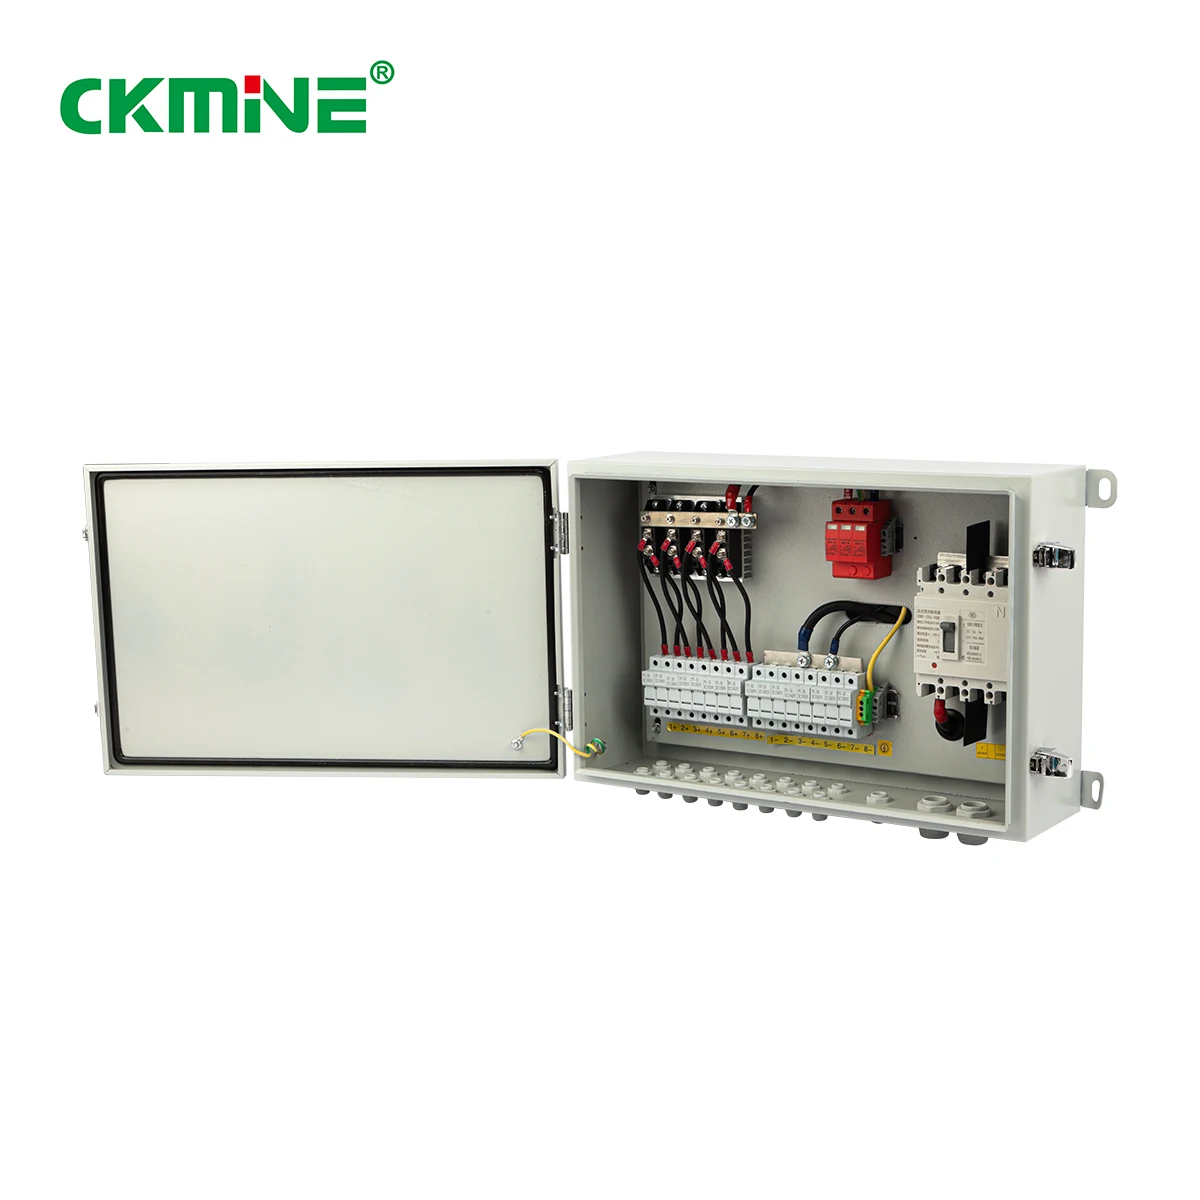 CKMINE Hot Selling PV Solar Array Combiner Box 1000V DC 6 String 1 out Customized 4 6 8 10 12 16 18 24 in for Power System